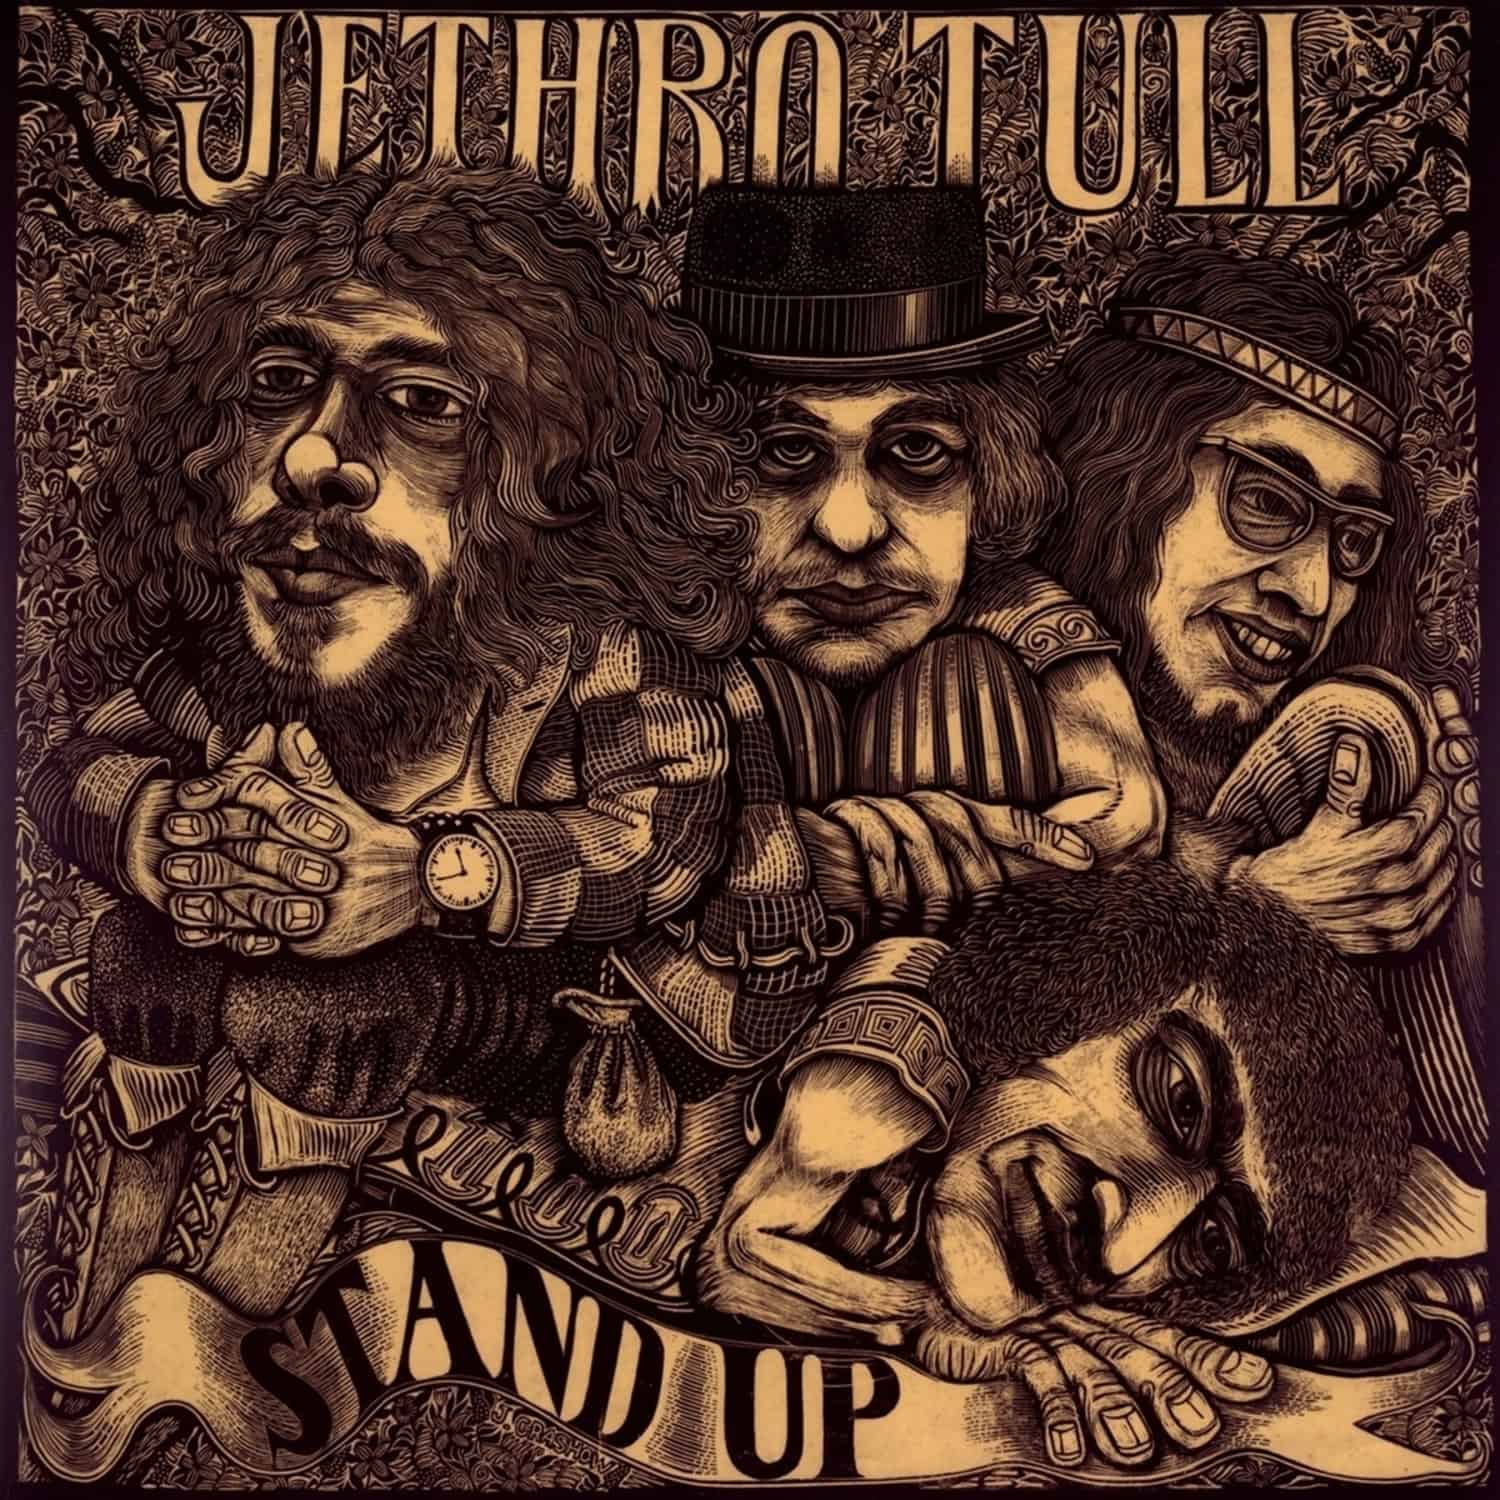 Jethro Tull - STAND UP 